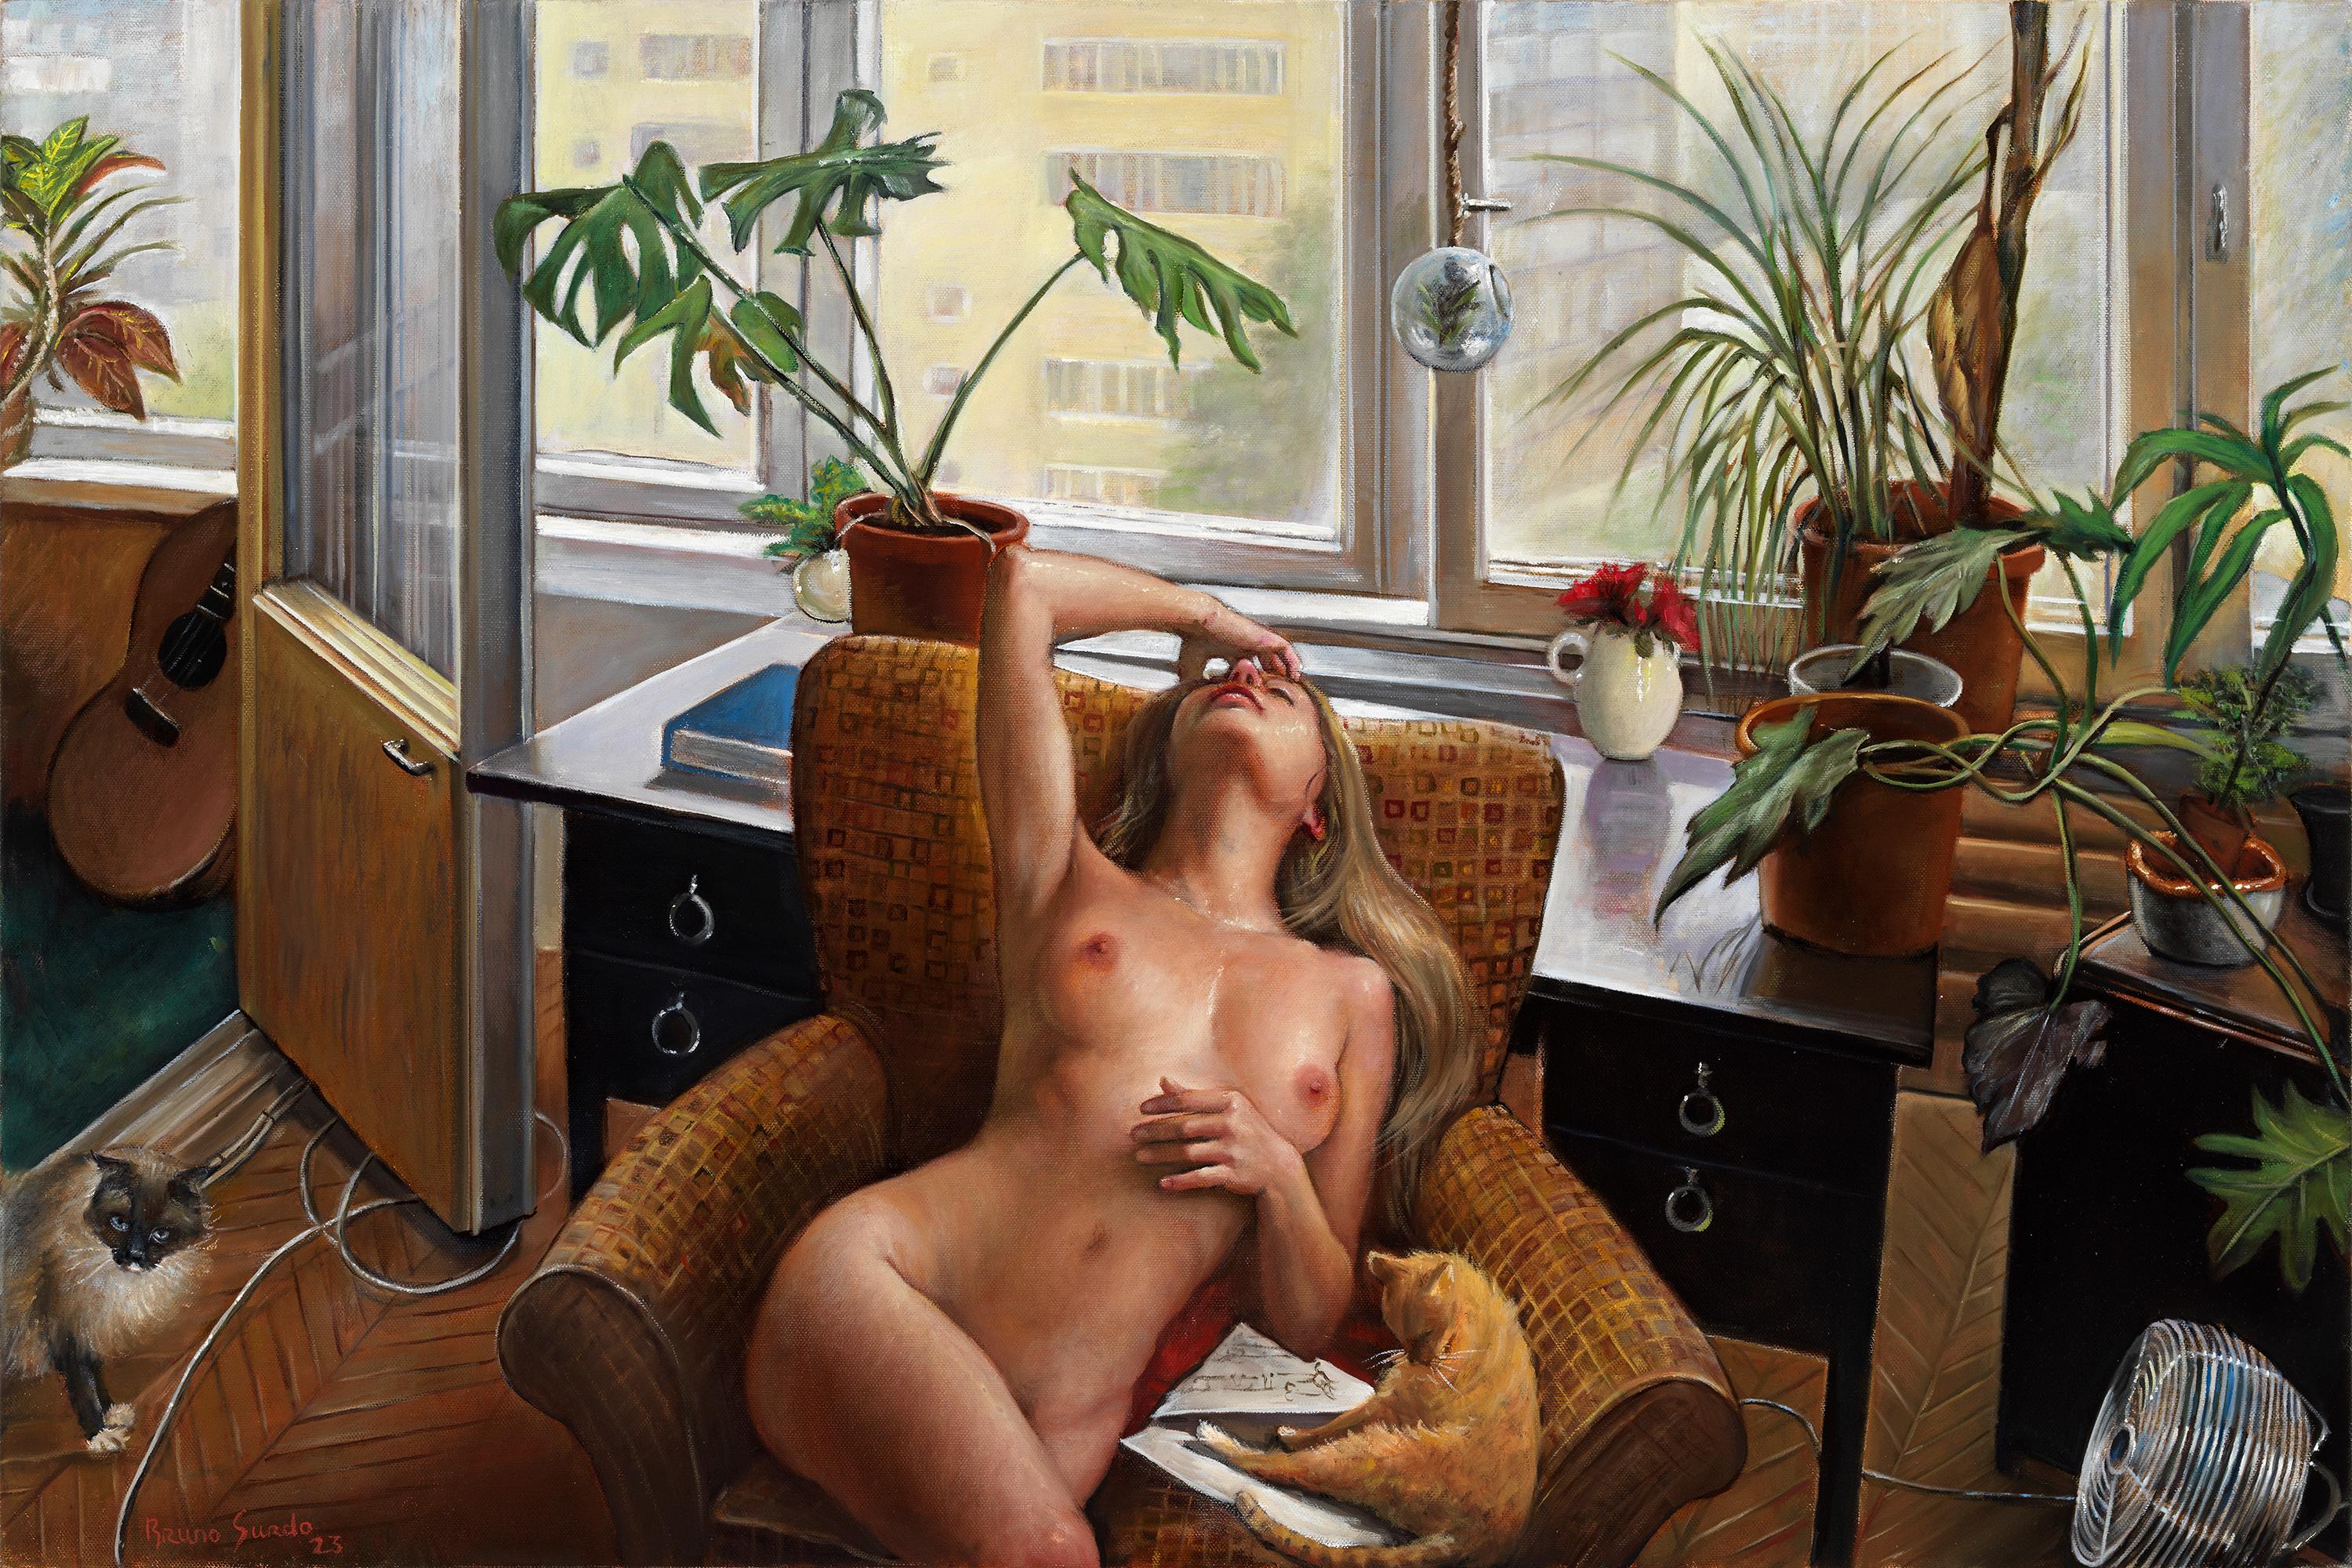 Bruno Surdo Interior Painting - My Inner Sanctum - Nude Woman Reclining On Chair w/ Cats, Original Oil Painting